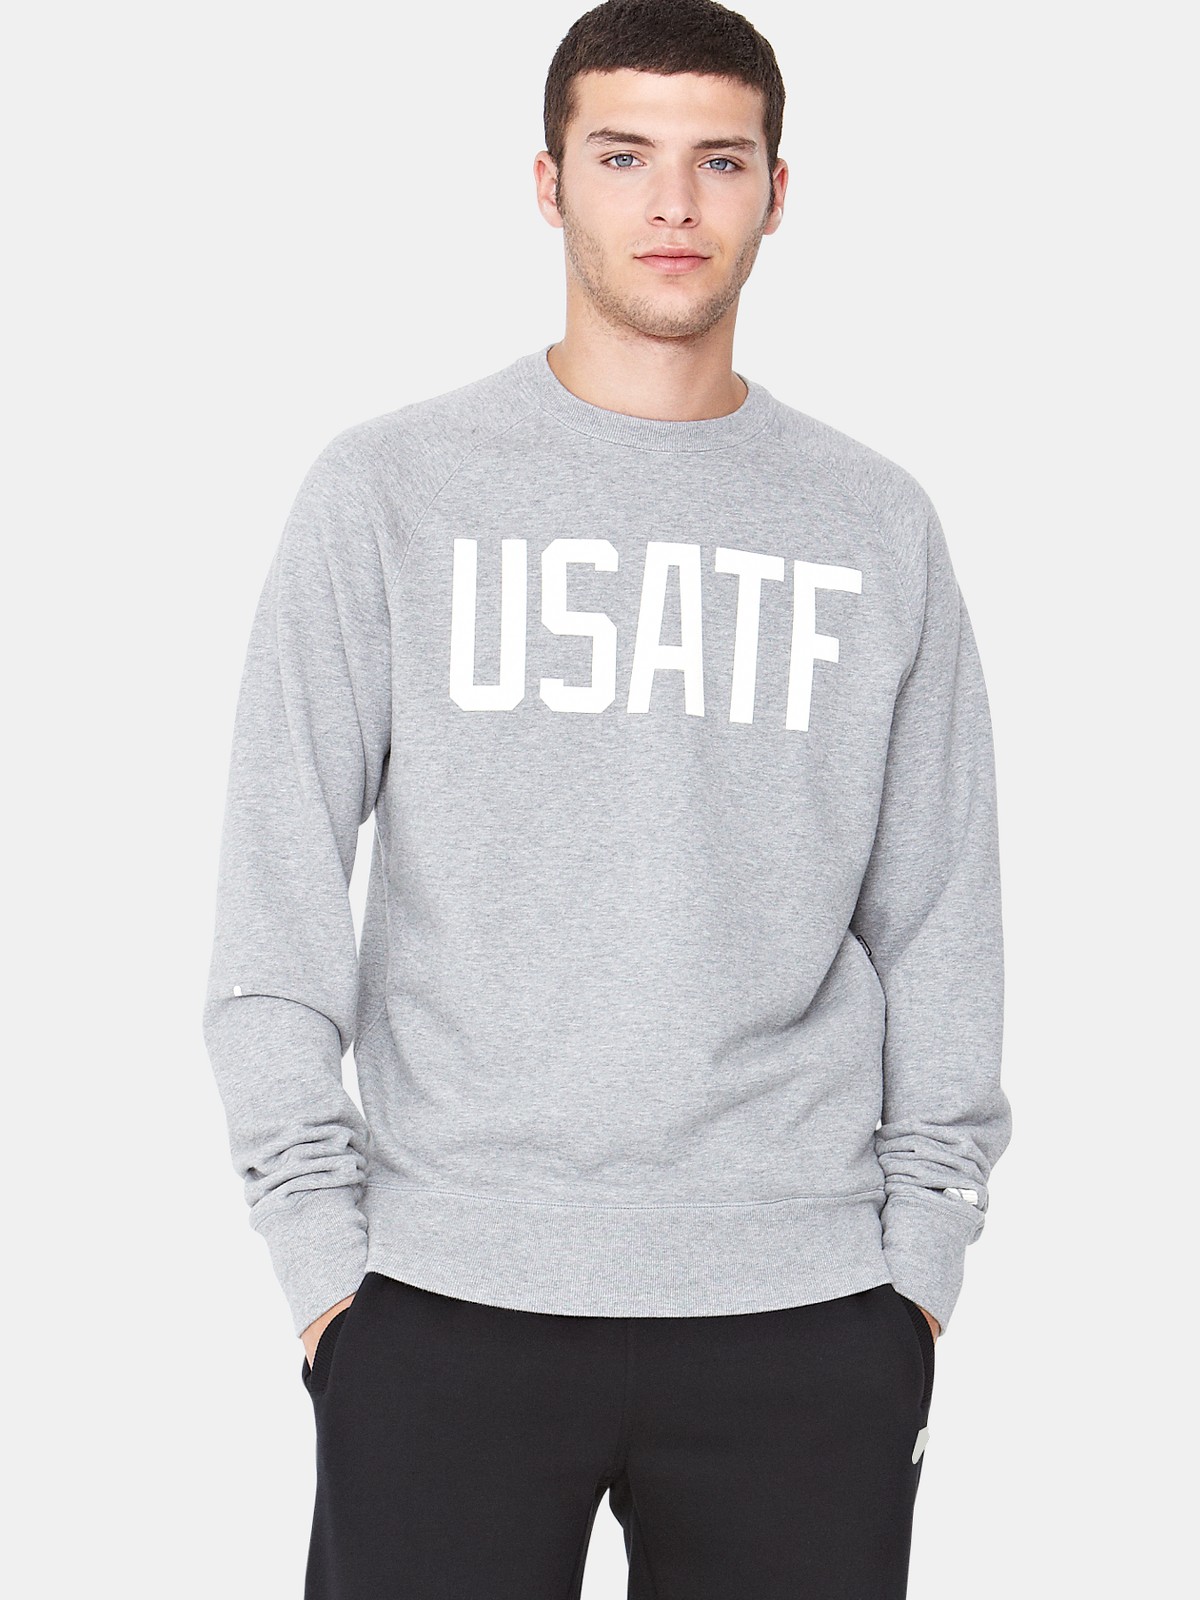 Nike Crew Neck Sweater in Gray for Men (grey_marl) | Lyst